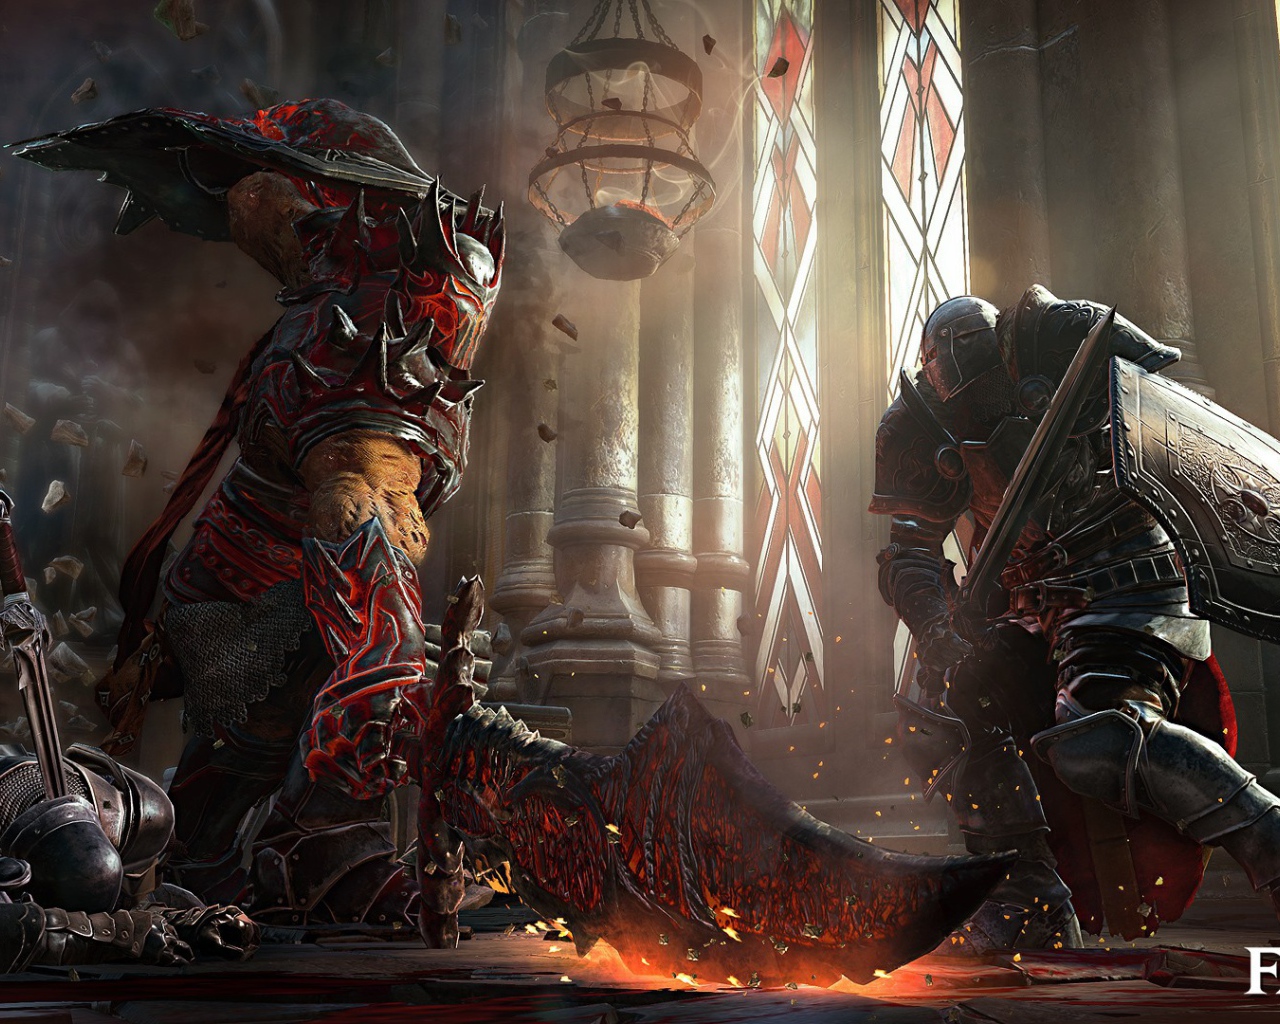 Lords of the fallen